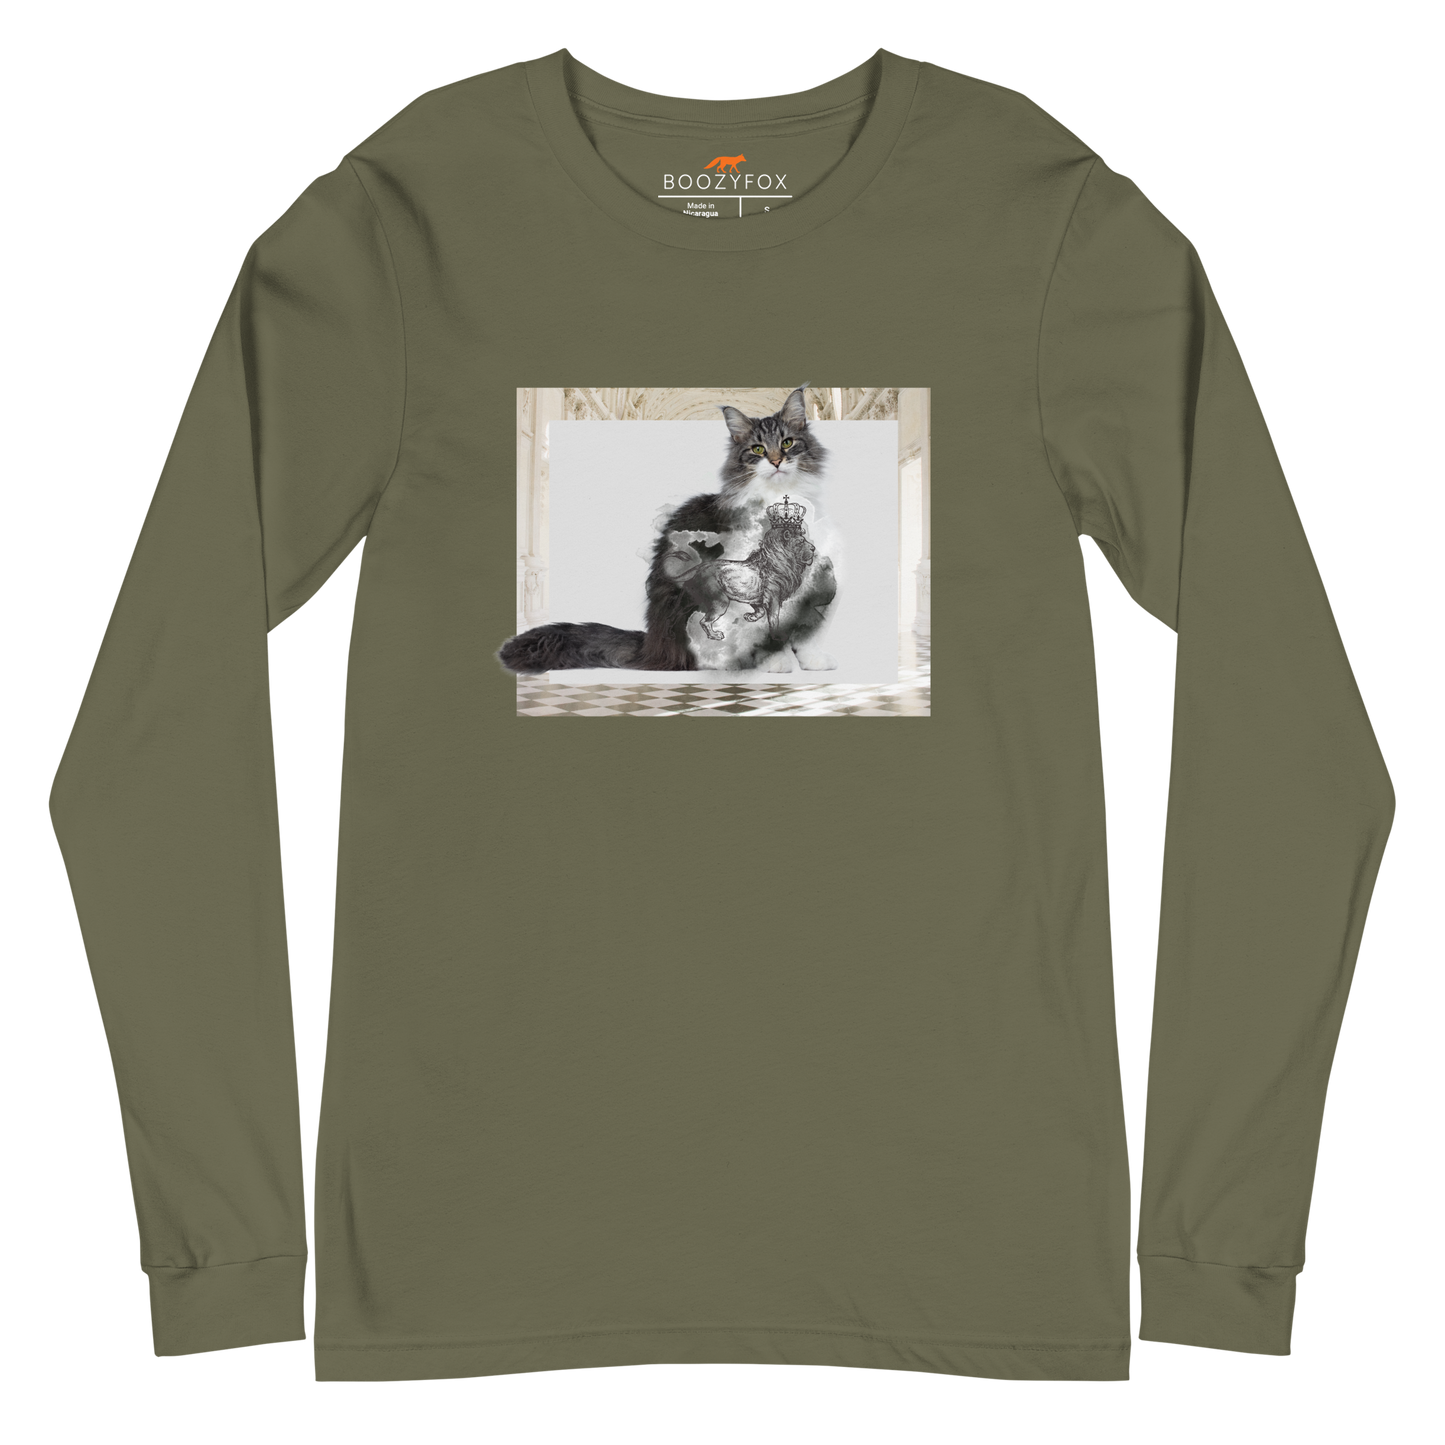 Military Green Royal Cat Long Sleeve Tee featuring a Majestic Cat graphic on the chest - Cute Cat Long Sleeve Graphic Tees - Boozy Fox